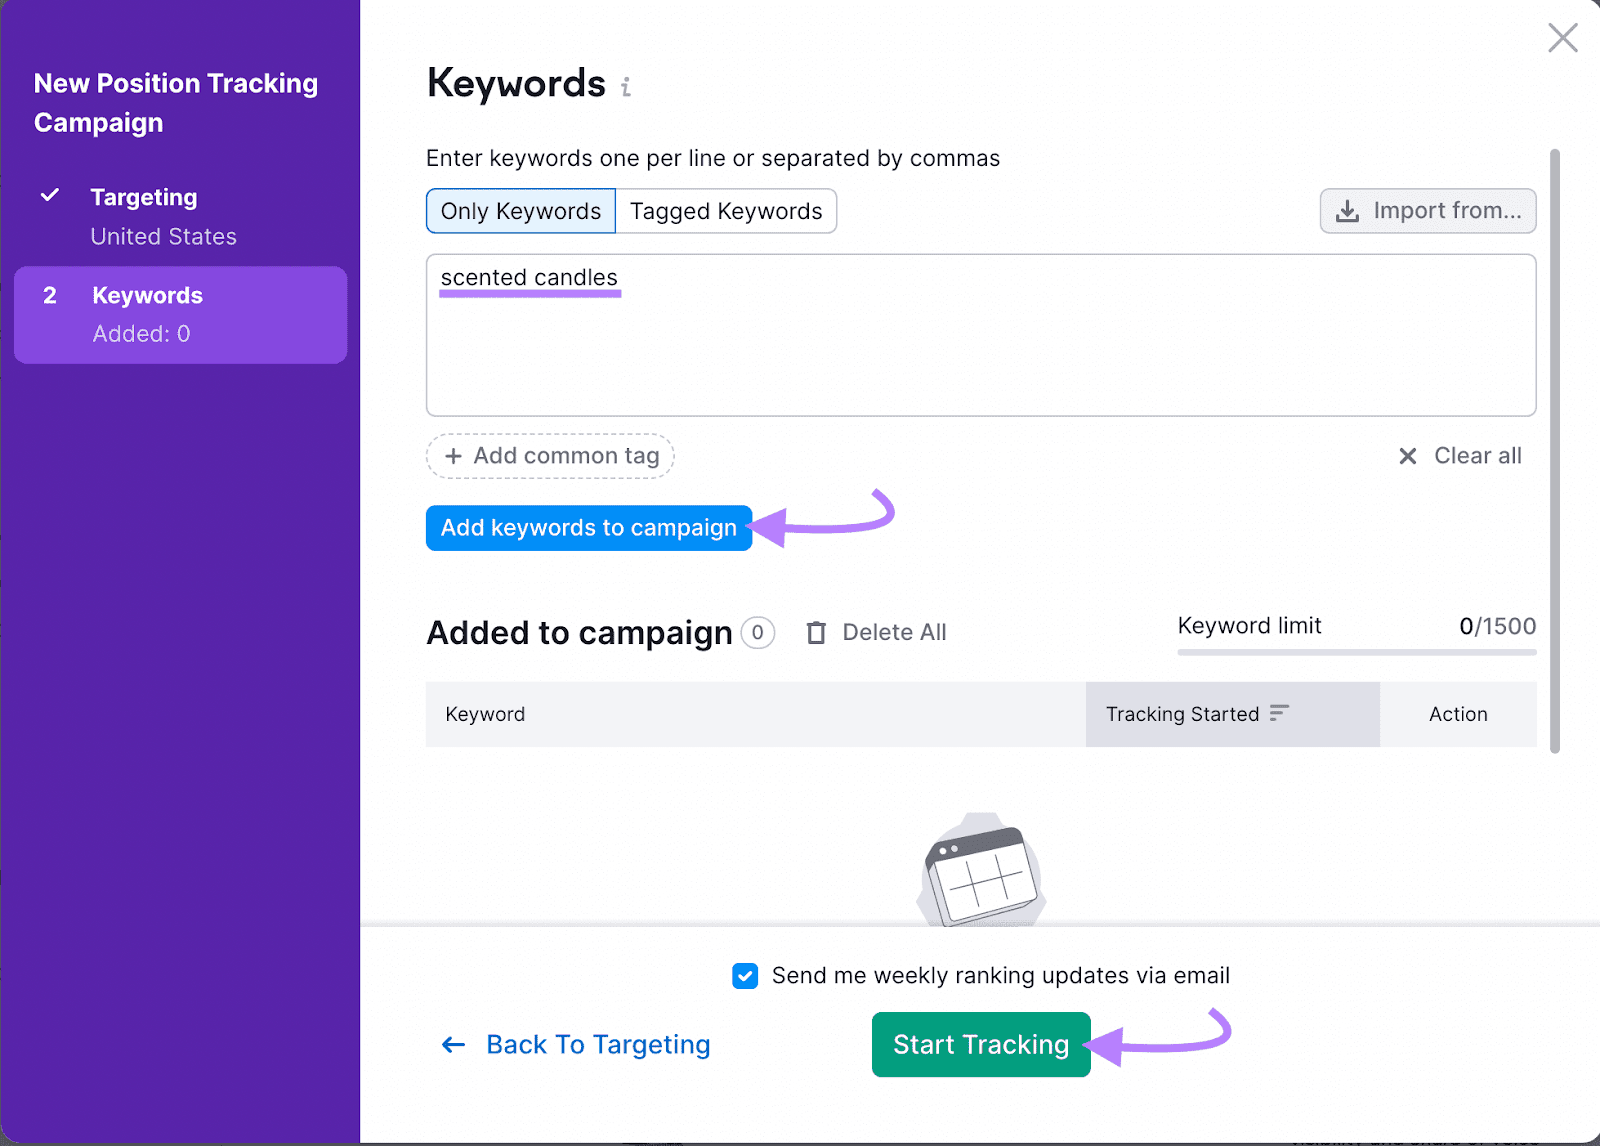 “Add keywords to campaign” and "Start Tracking" buttons highlighted